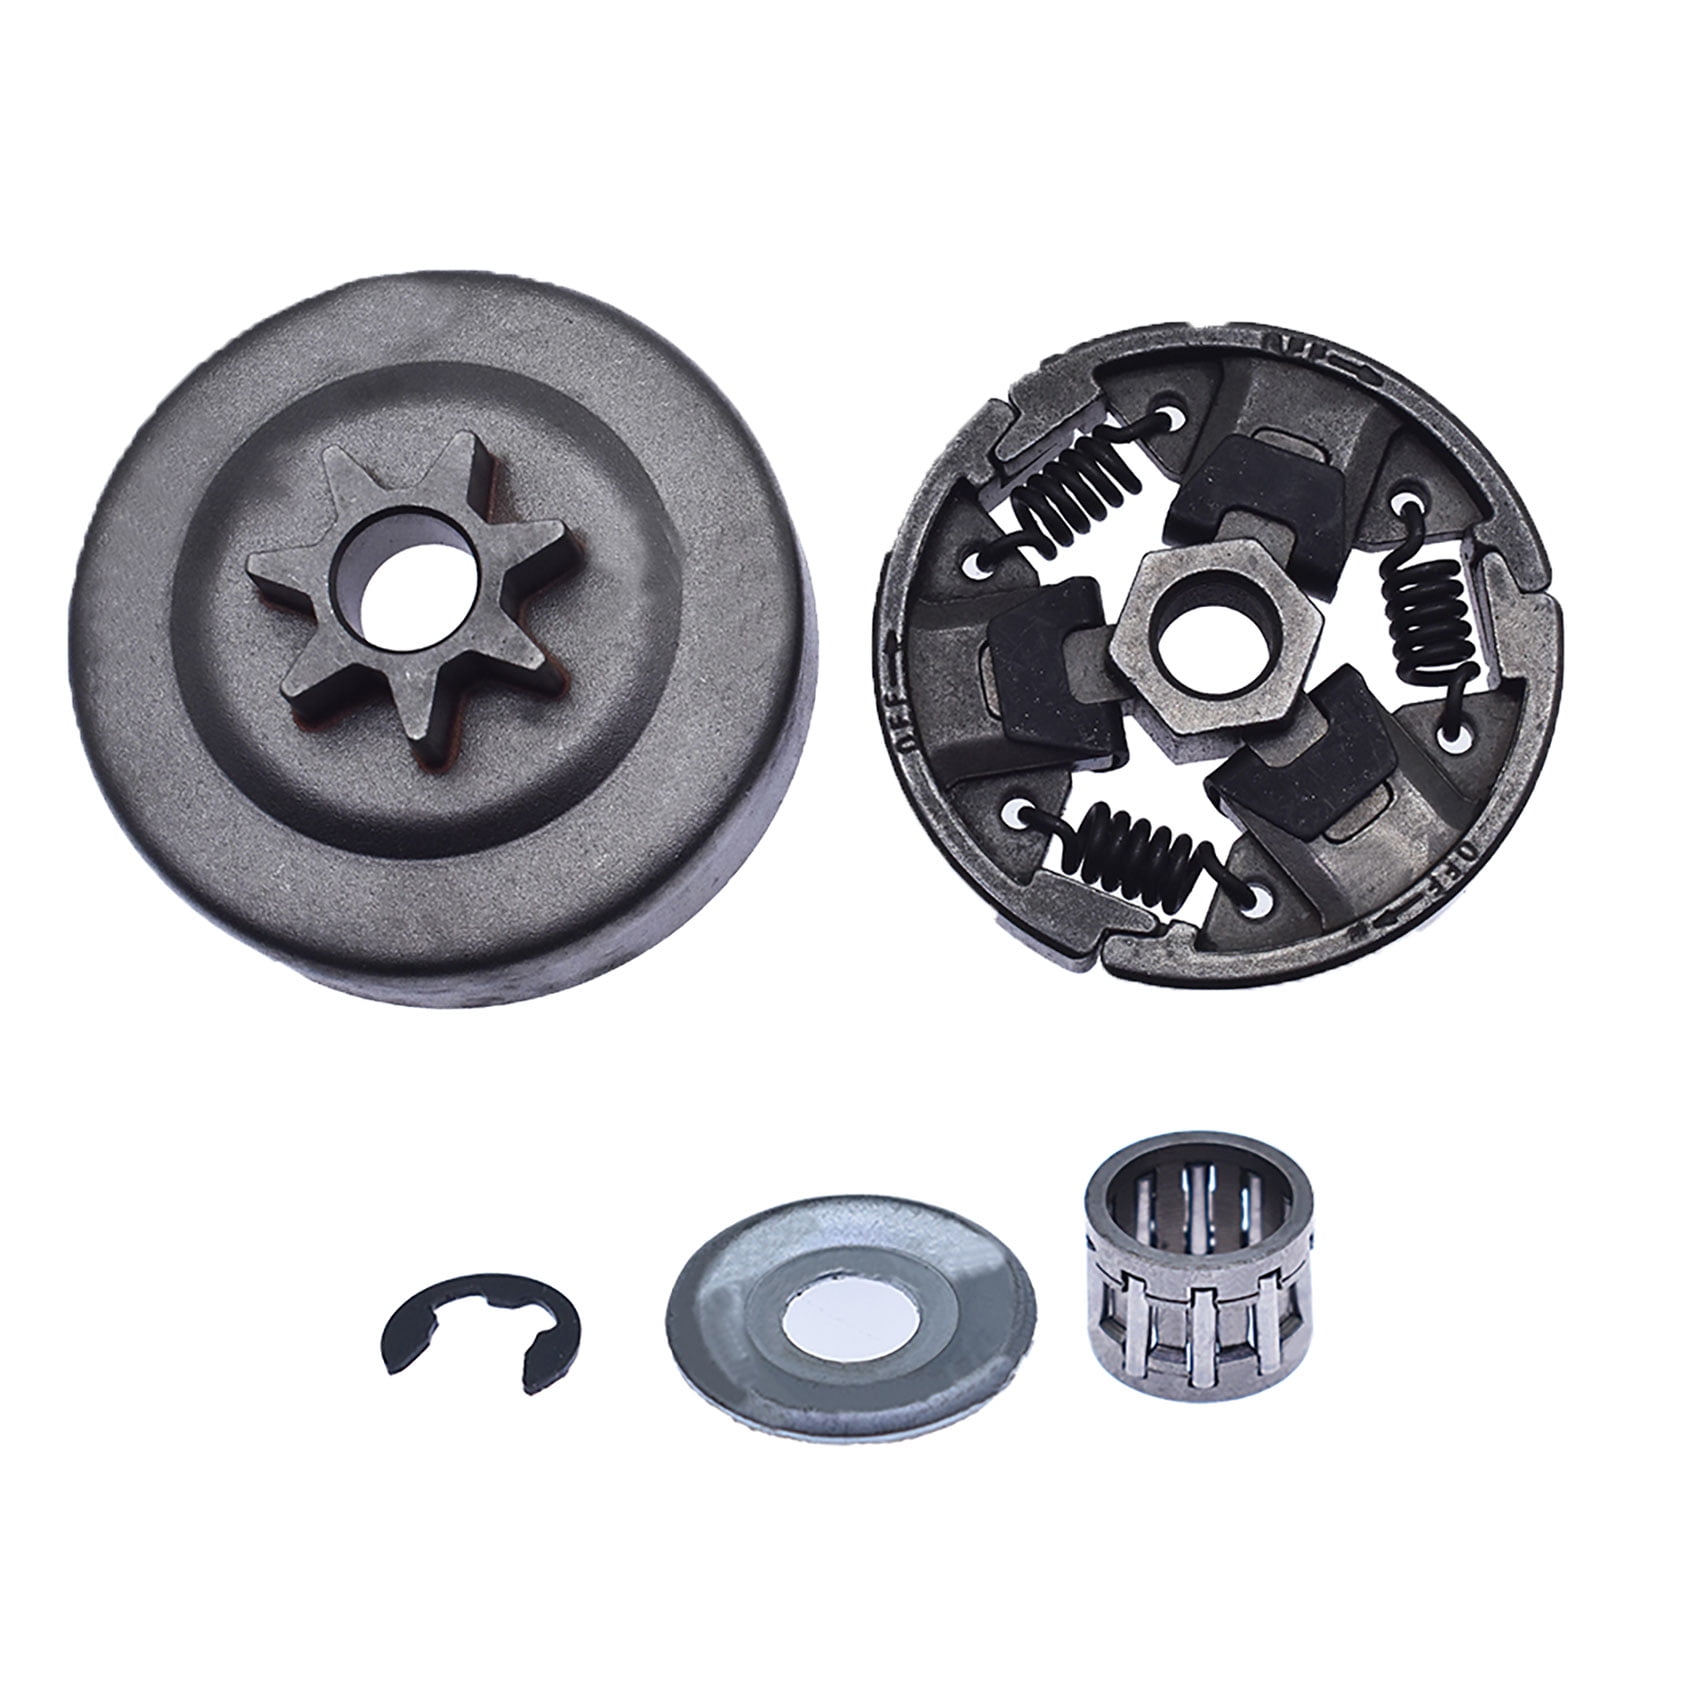 For Stihl MS271 MS291 Chainsaw Spur Gear Sprocket Clutch Drum Kits 325-7T Parts 